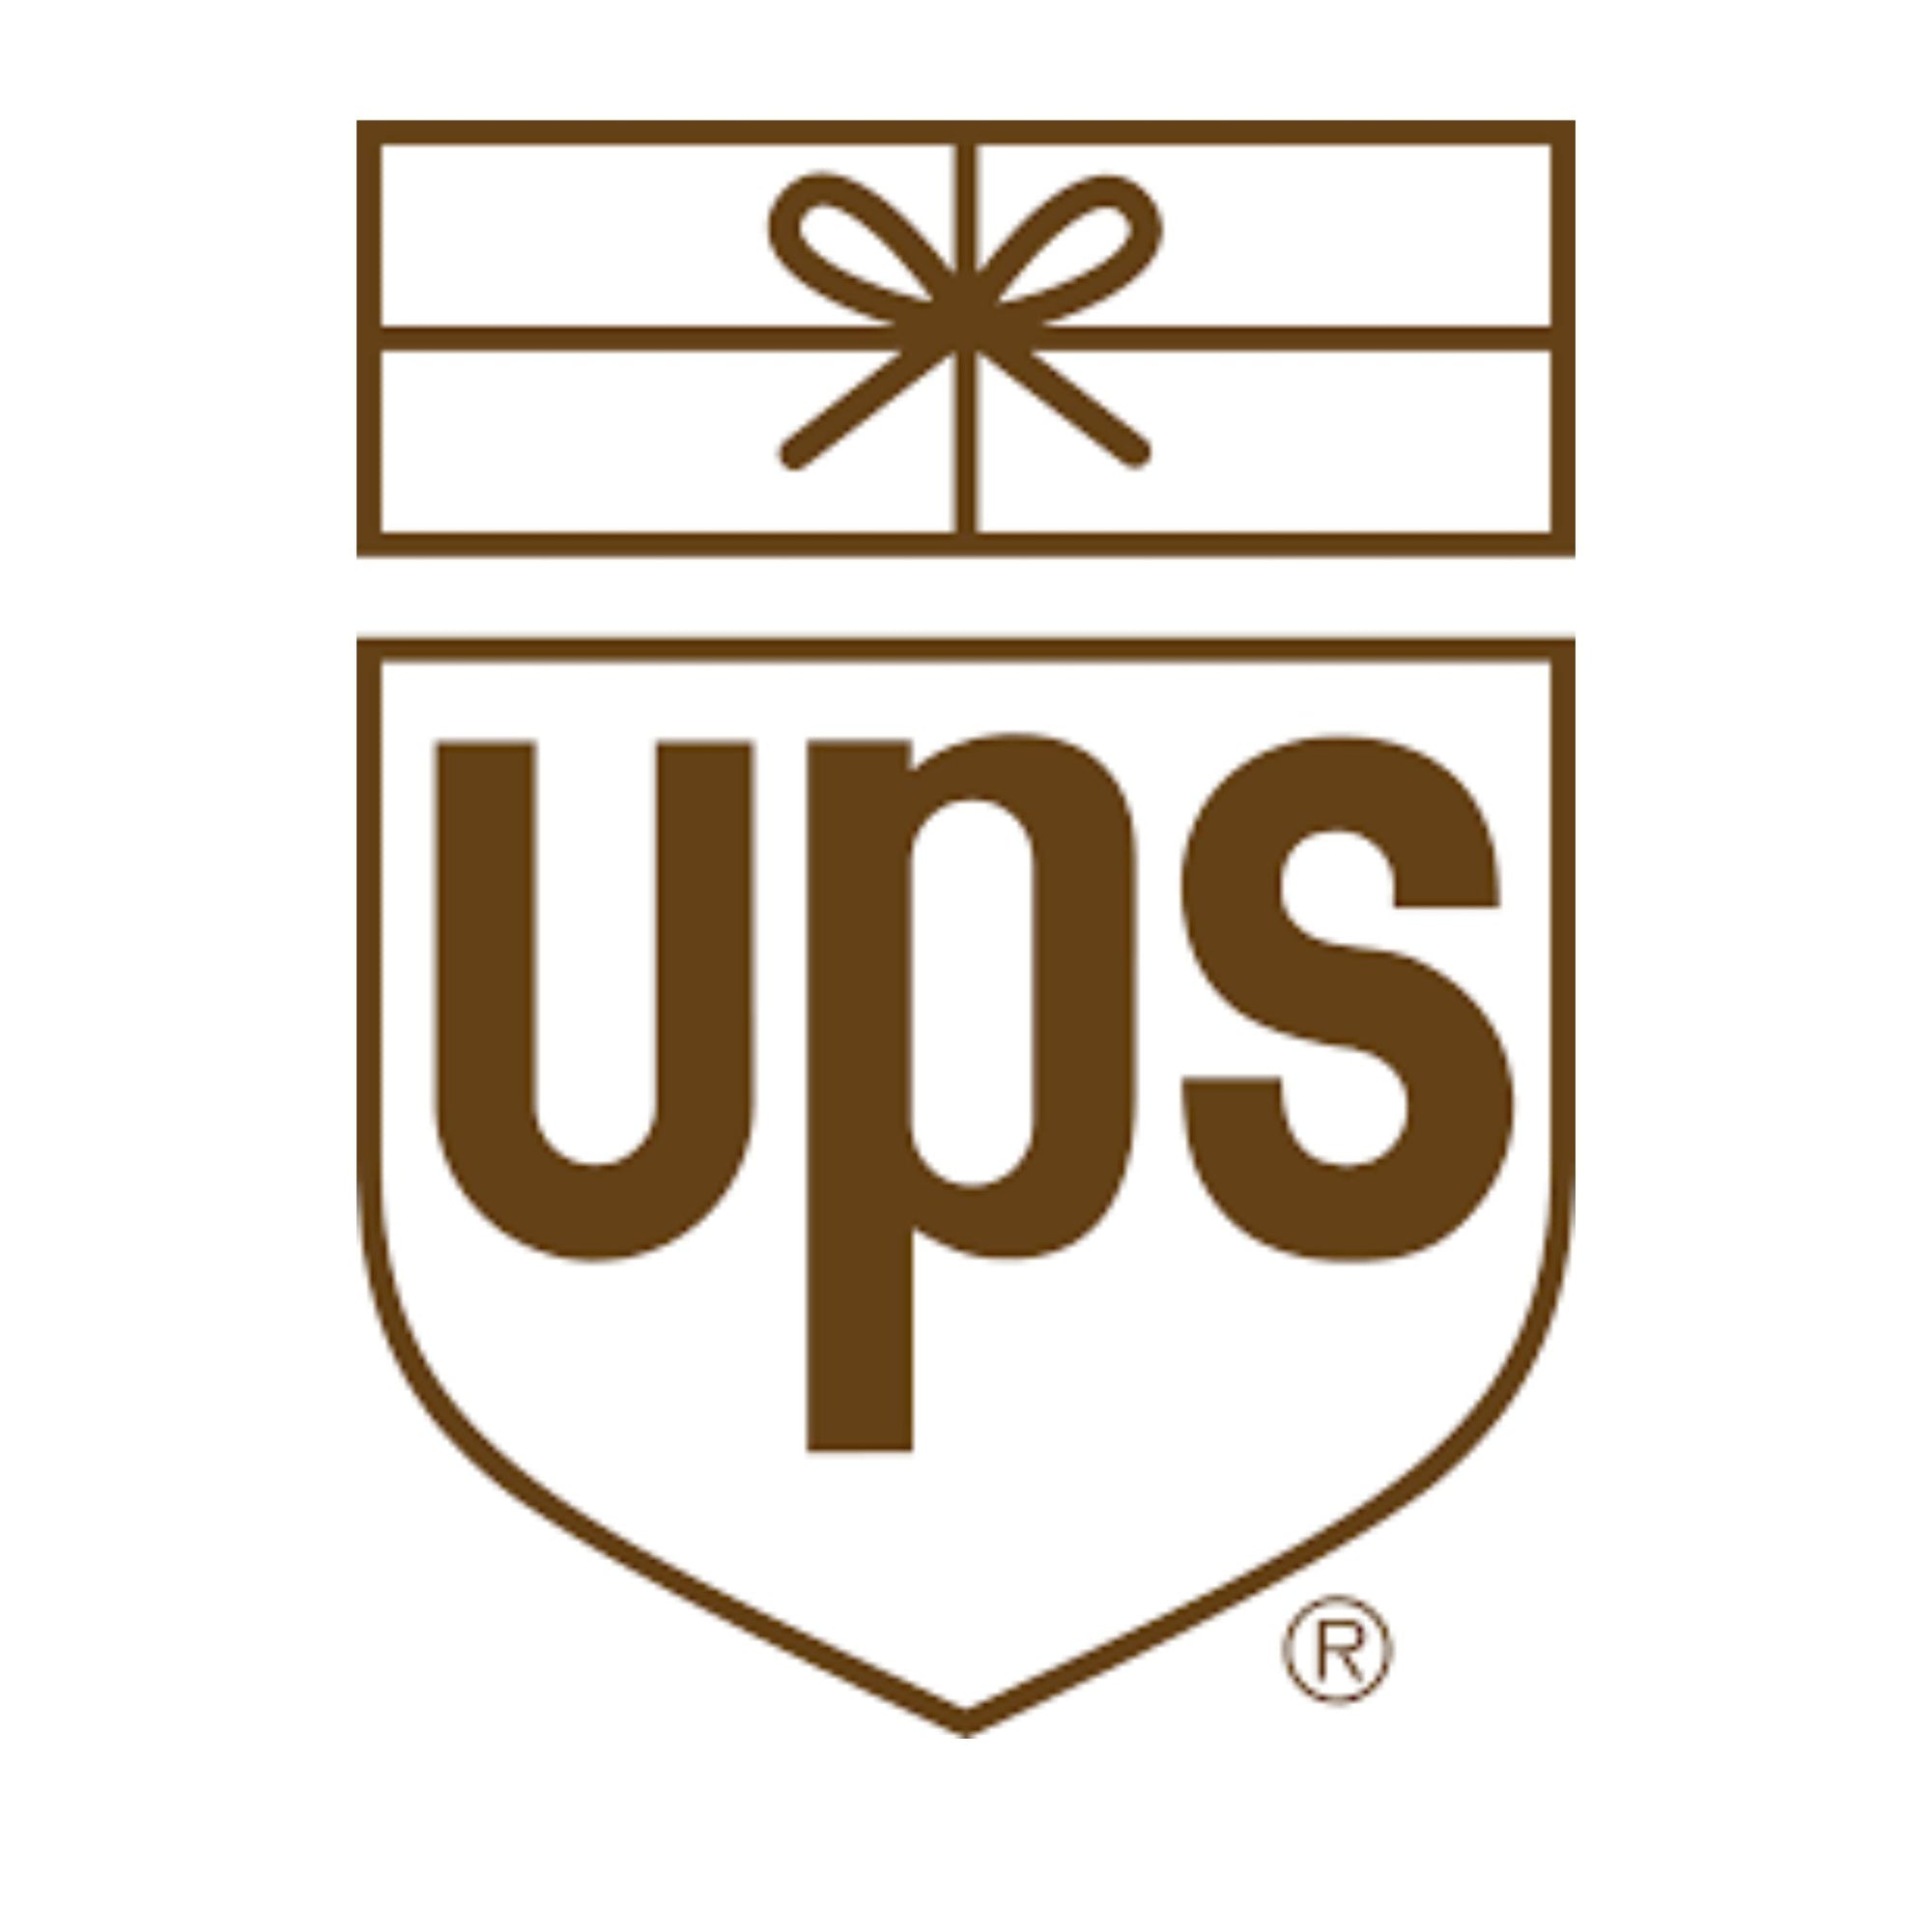 The Lock Source Allows Customers to Ship By Any Method Including UPS Freight - The Lock Source